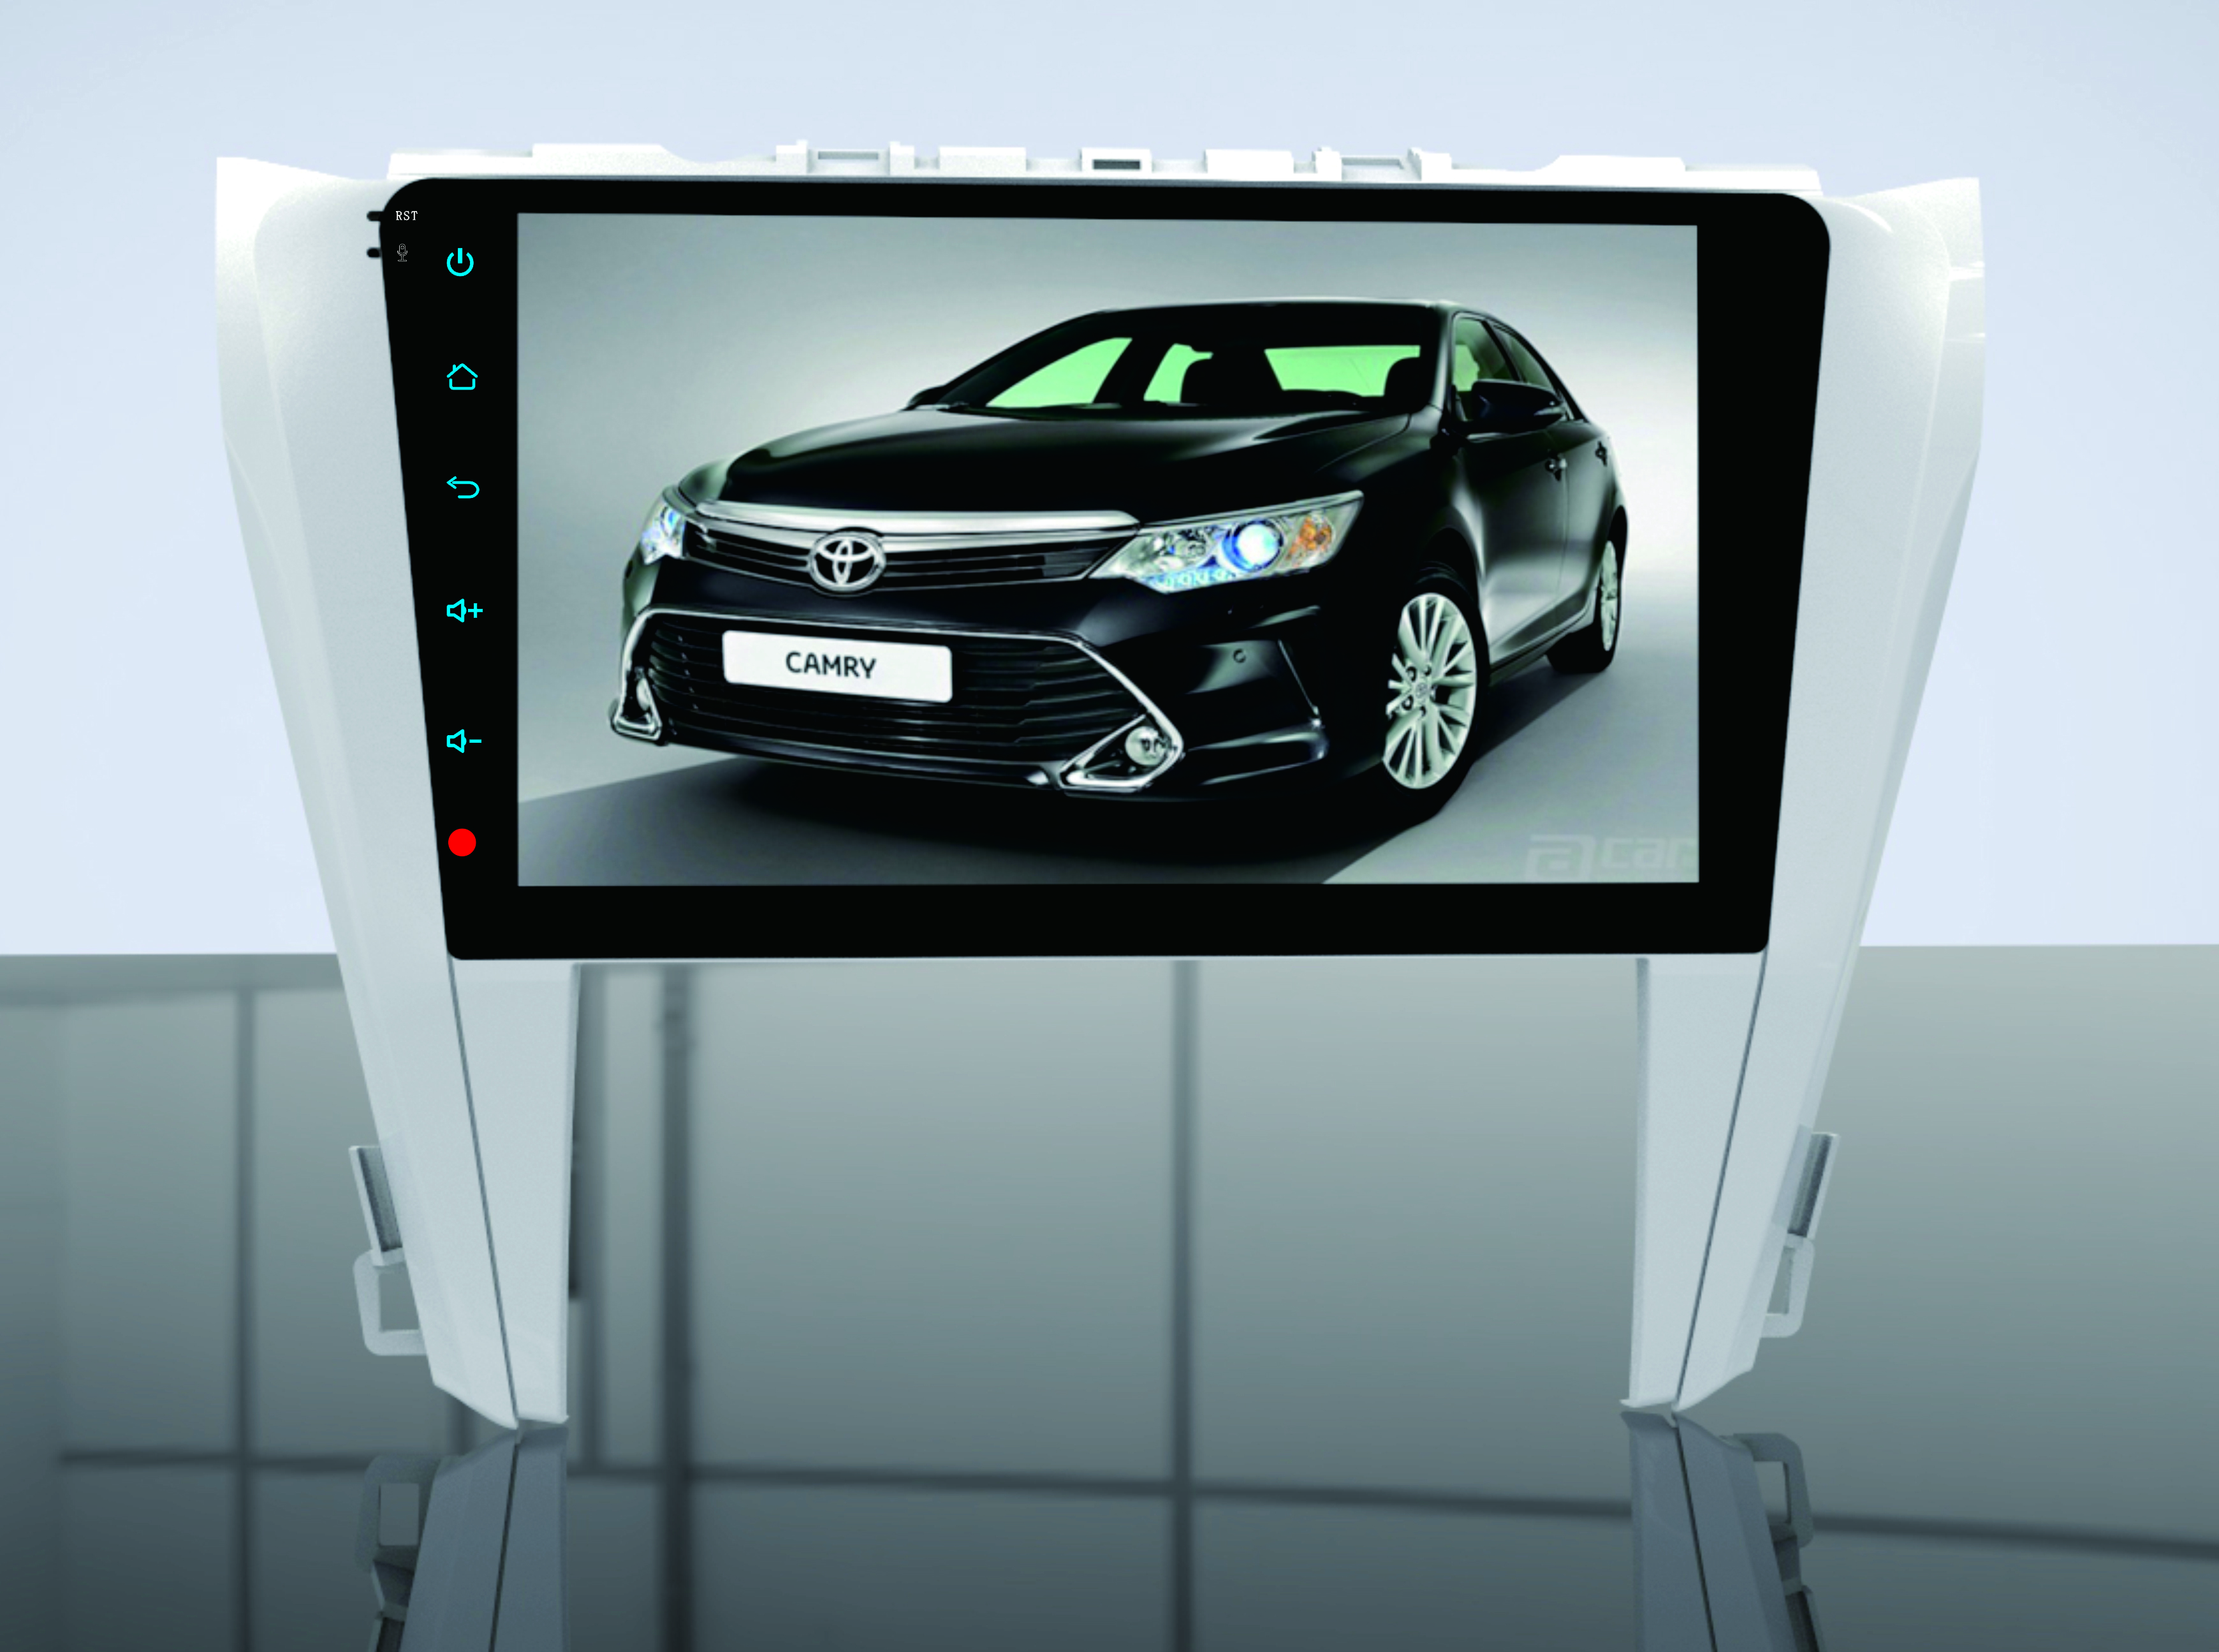 TOYOTA CAMRY 2015 10.1'' Capacitive Touch Screen Car Pad Android 6.0/7.1 Auto GPS Navigation Bluetooth Wifi Mirror link Eight/Quad Cores Car Multimedia Player FM AM Radio